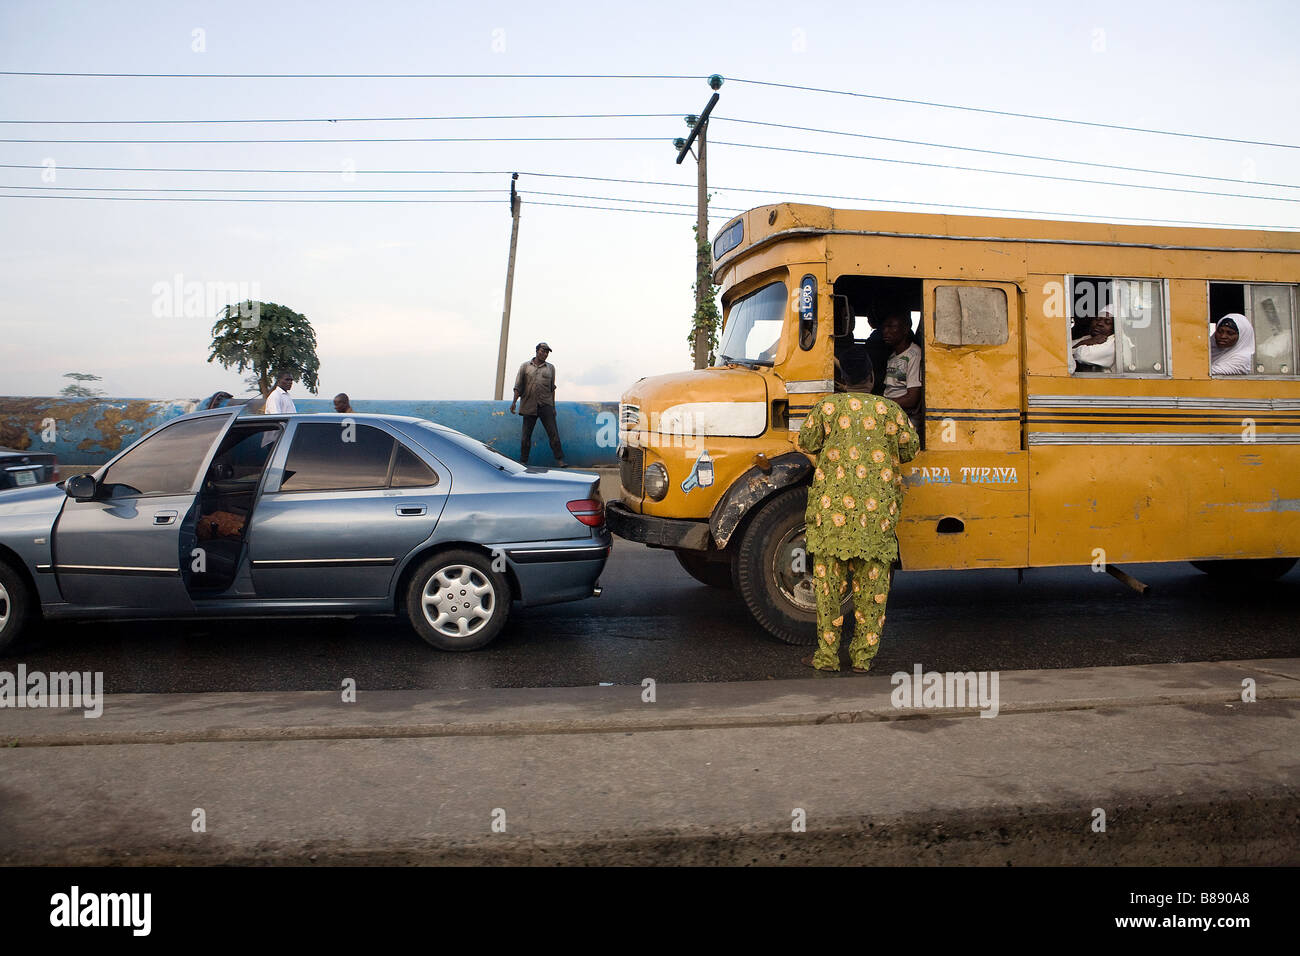 A yellow Nigerian bus has crashed into a private car whose driver is in discussion with the bus driver Stock Photo